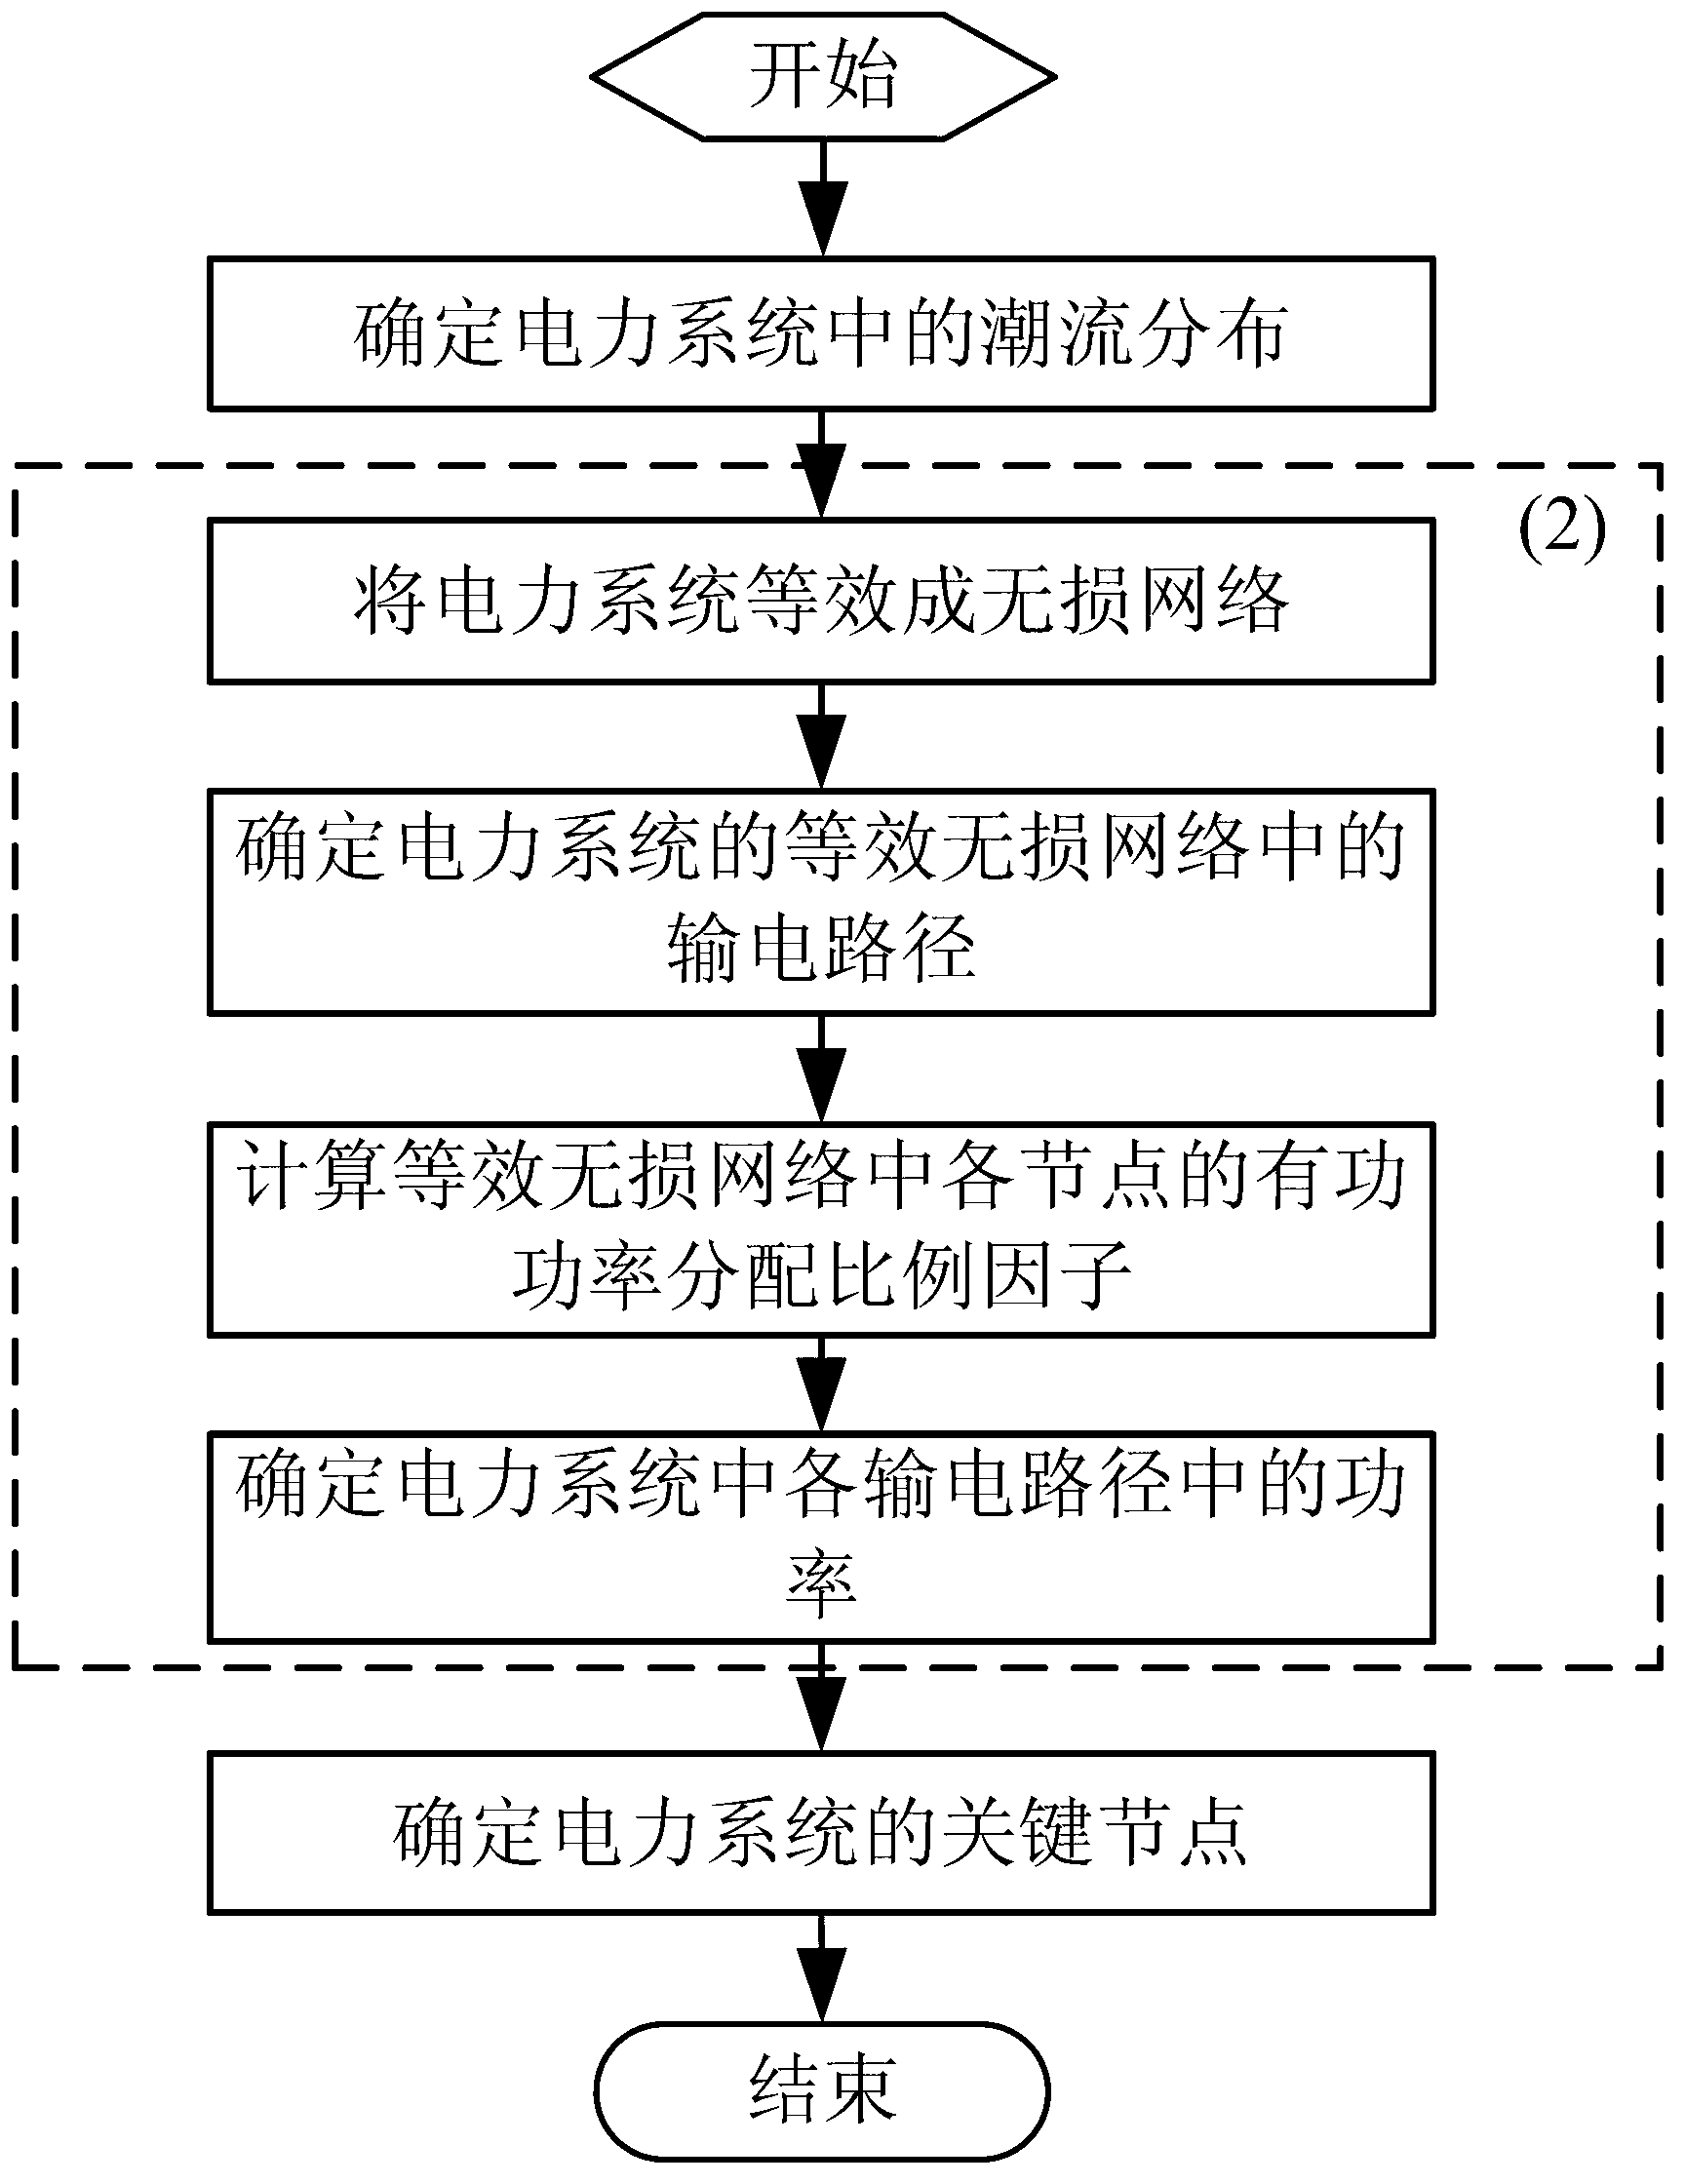 Electrical power system key node identification method based on active power load flow betweenness